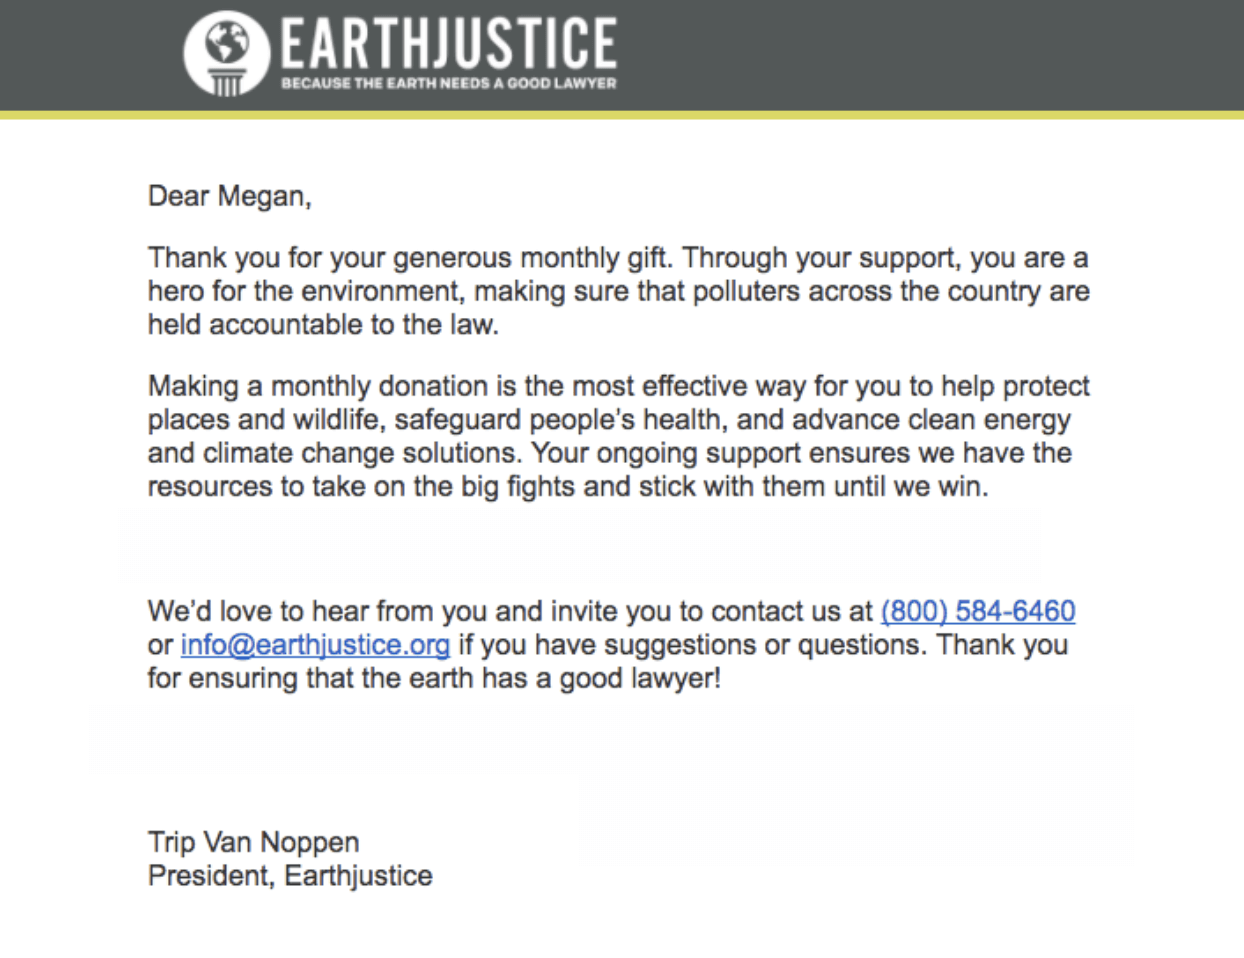 npo email marketing earthjustice